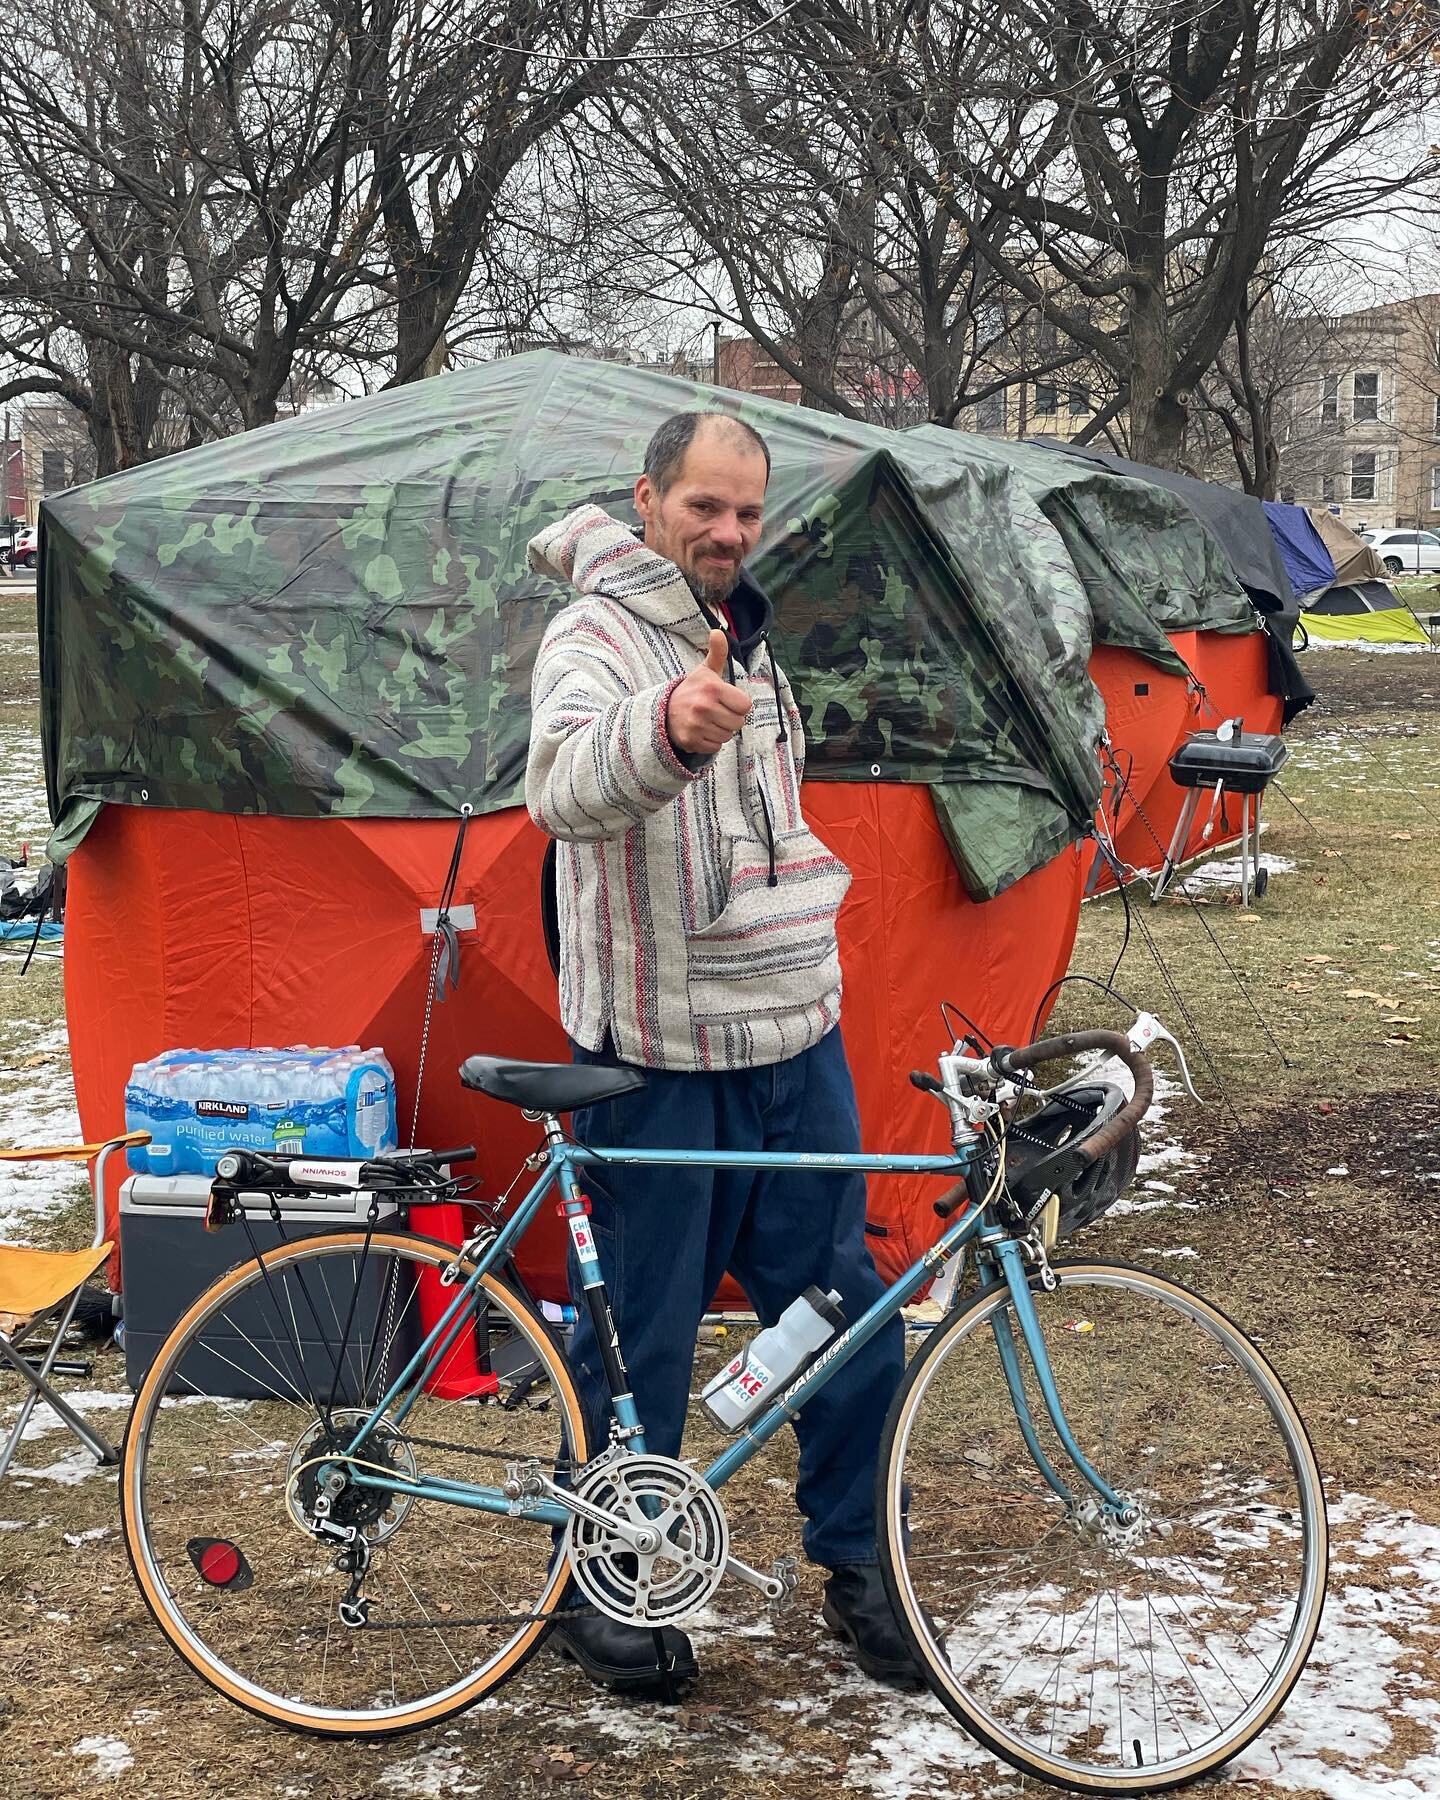 Got a couple more bikes out before Christmas! Victor and Alan are kind and sweet, and always greet me when I arrive and check in on how I&rsquo;m doing. Imagine that. The weather is turning to the negatives this week and they are making sure I&rsquo;